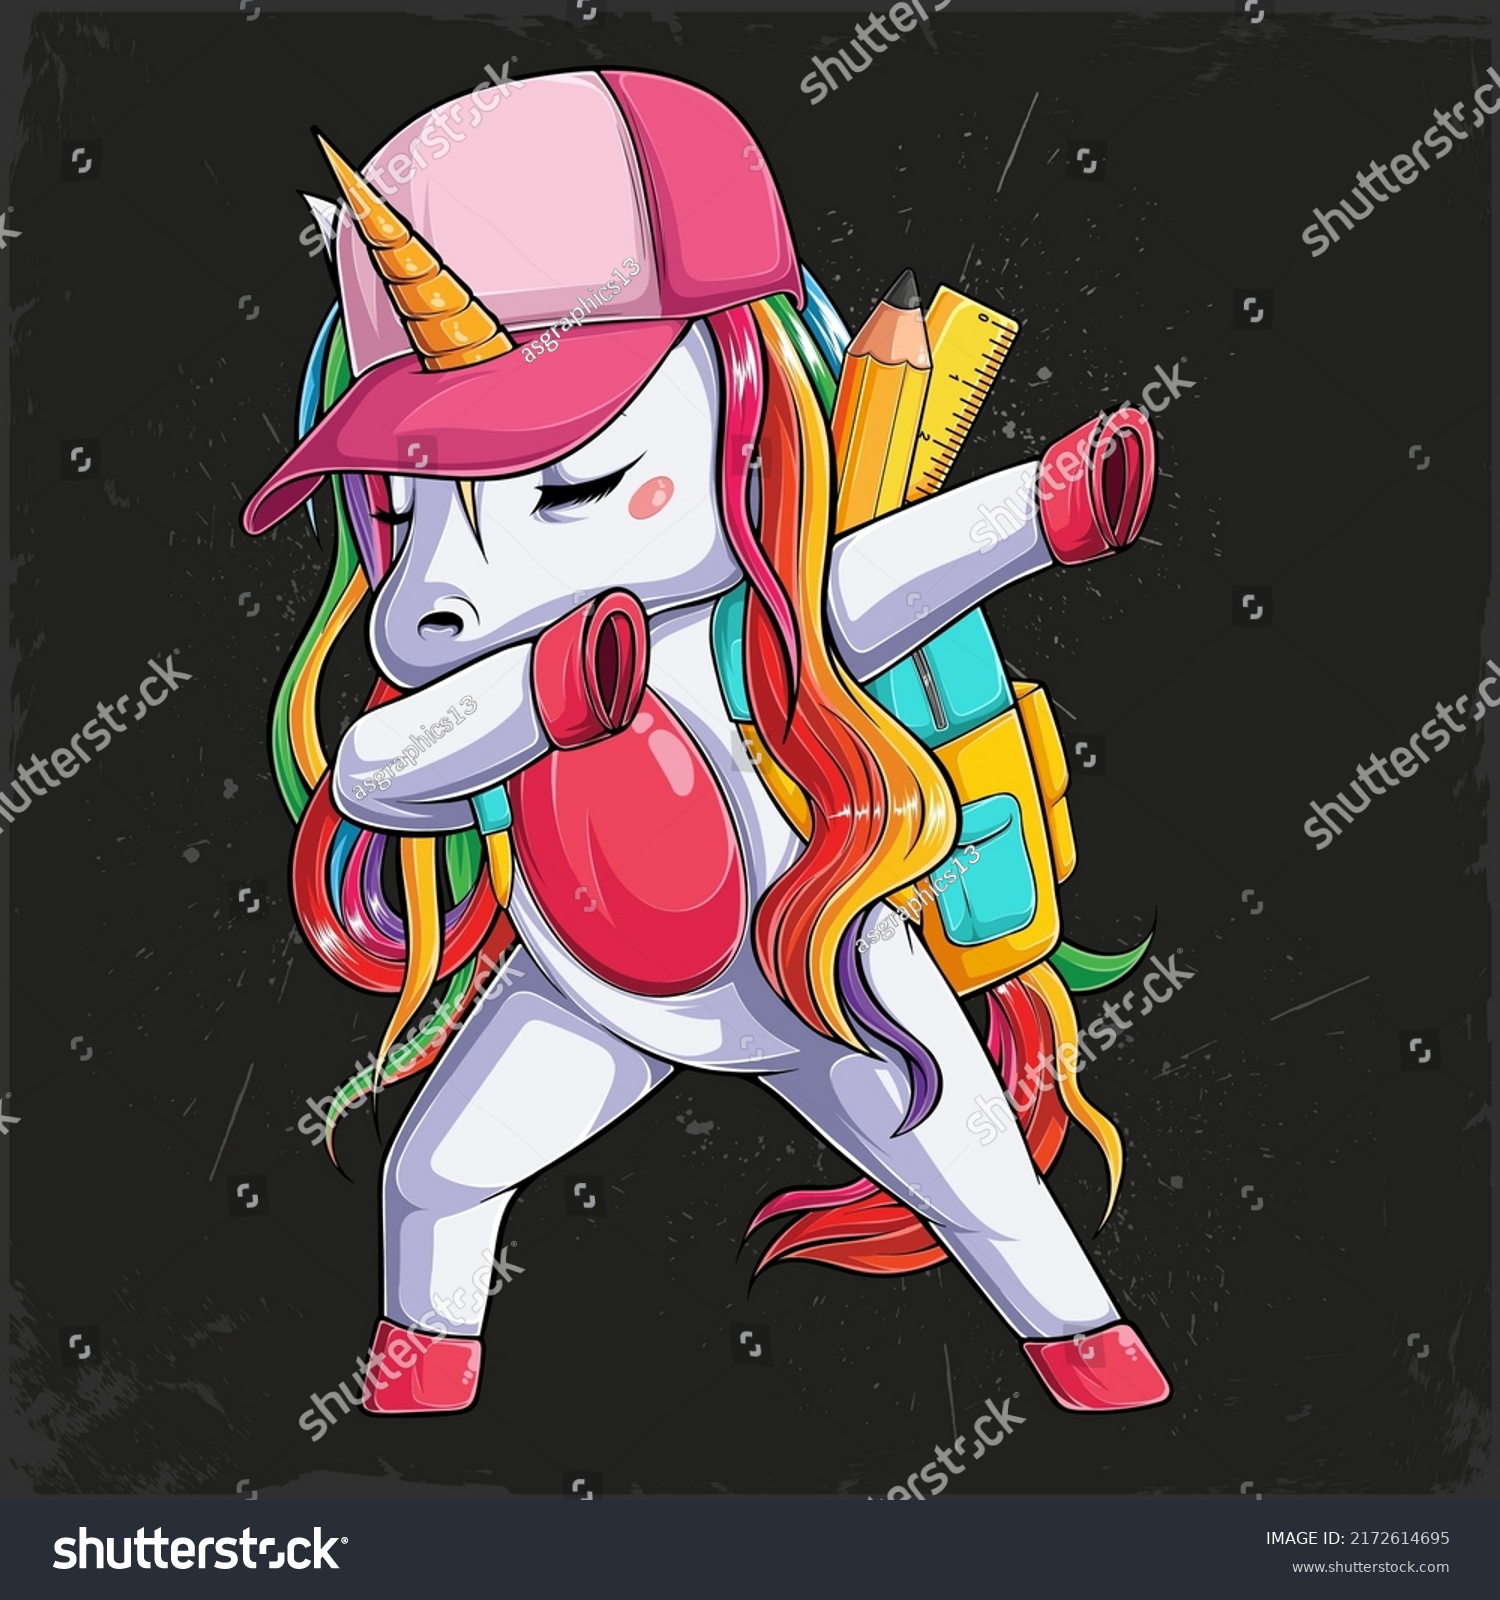 SVG of Back to school funny unicorn wearing pink cap and backpack with crayon and rule doing dabbing dance svg